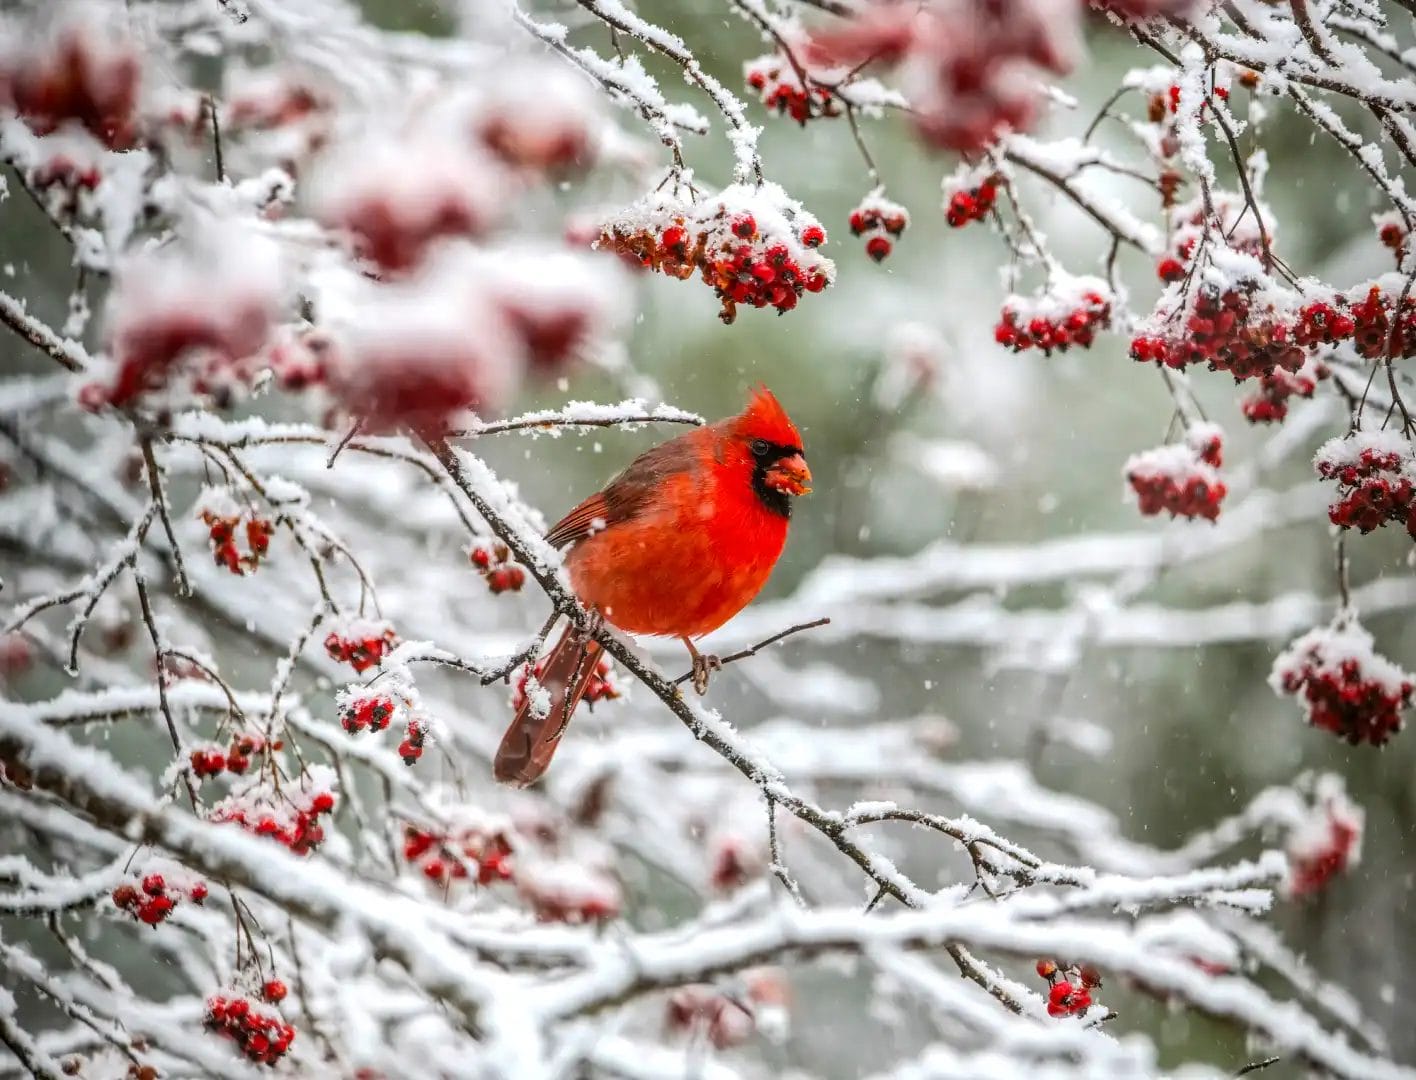 Red Cardinal bird on a snow covered tree branch surrounded by red berries